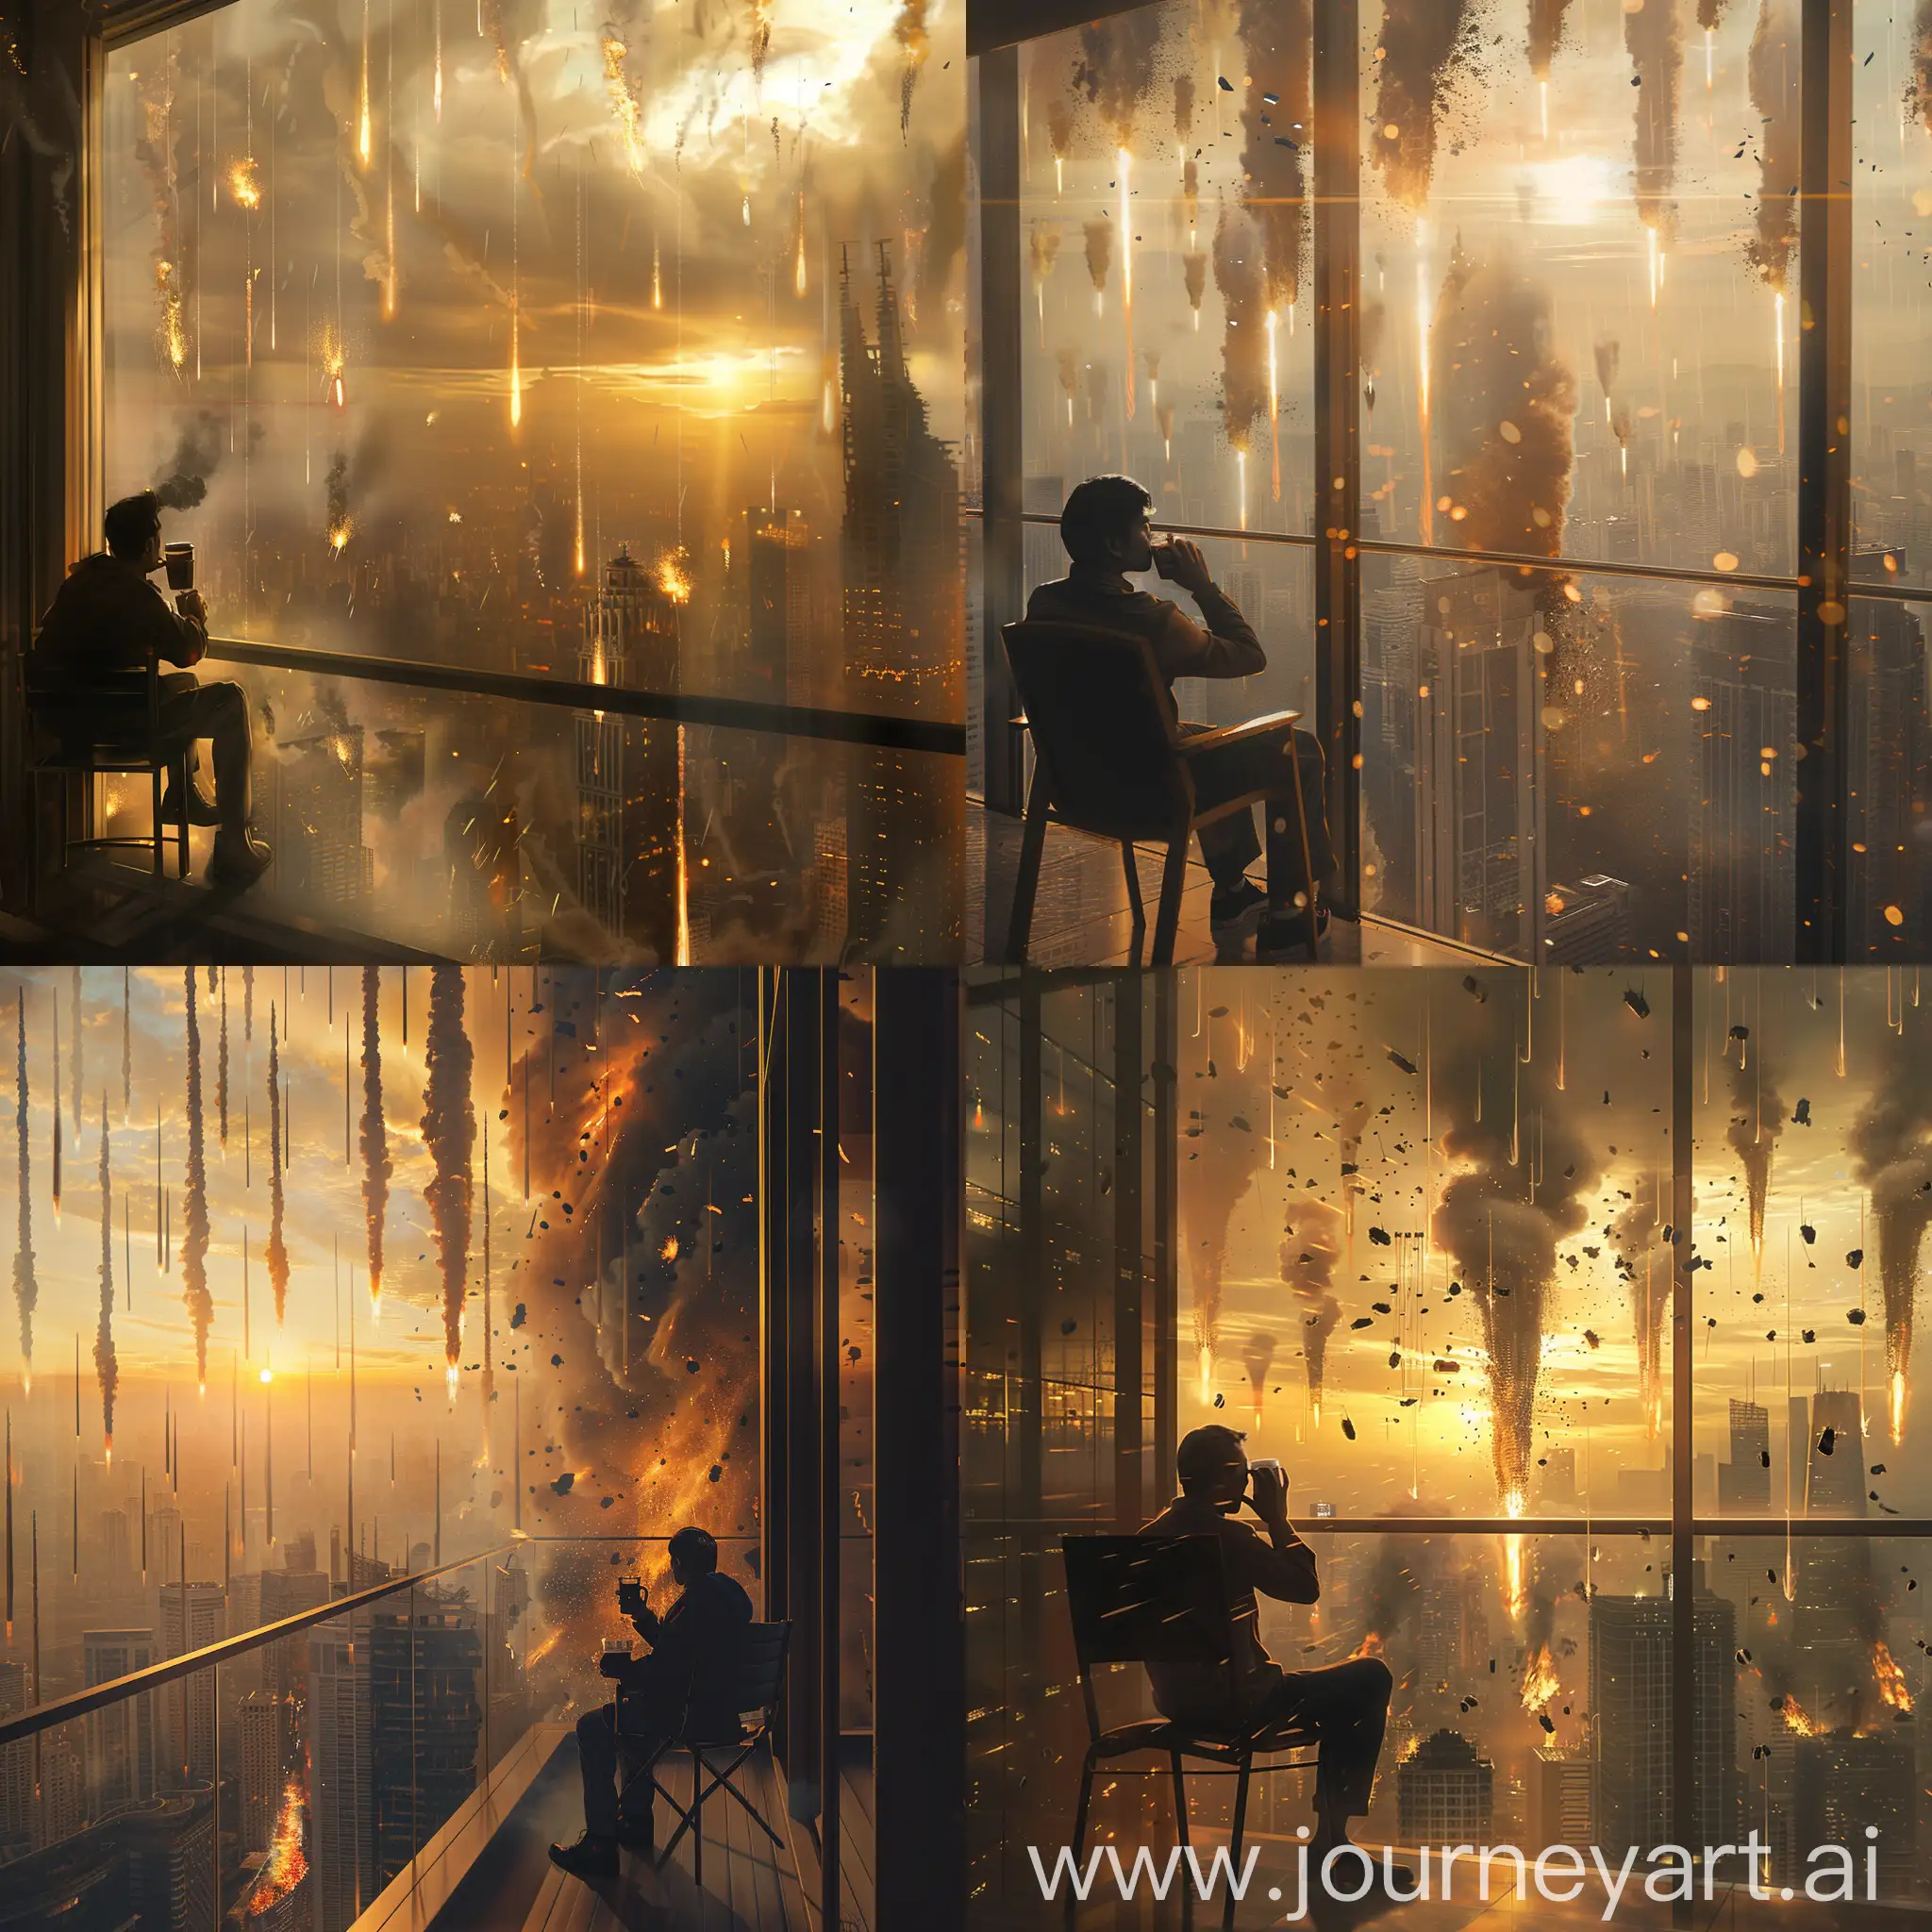 A man sitting on a chair and drinking coffee on the balcony sees the city as it rains rockets and all the buildings are exploding and it is full of dust And the sun is setting and the man is looking from the skyscraper and dreamy